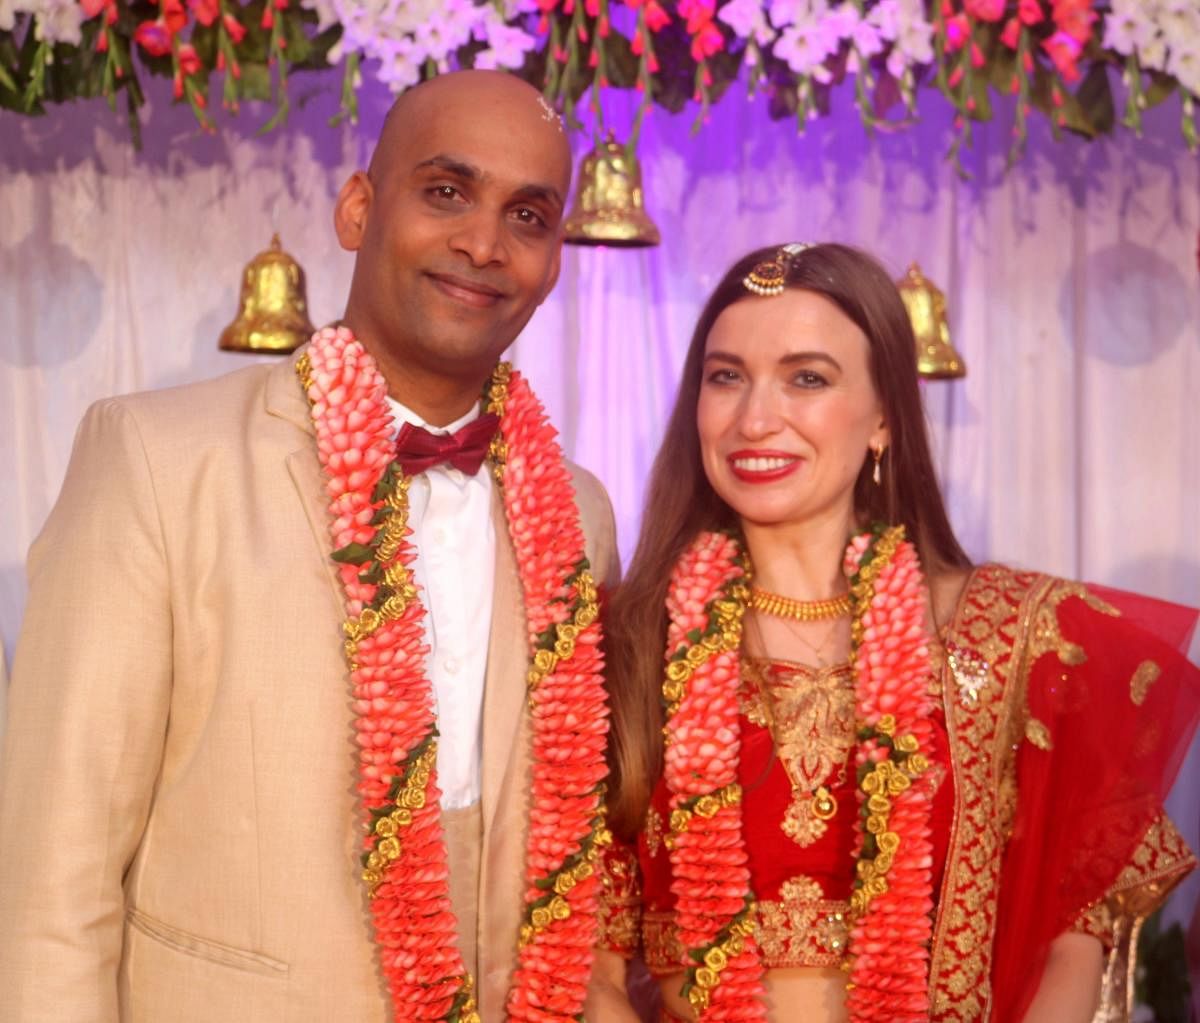 Somwarpet youth ties nuptial knot with Russian girl